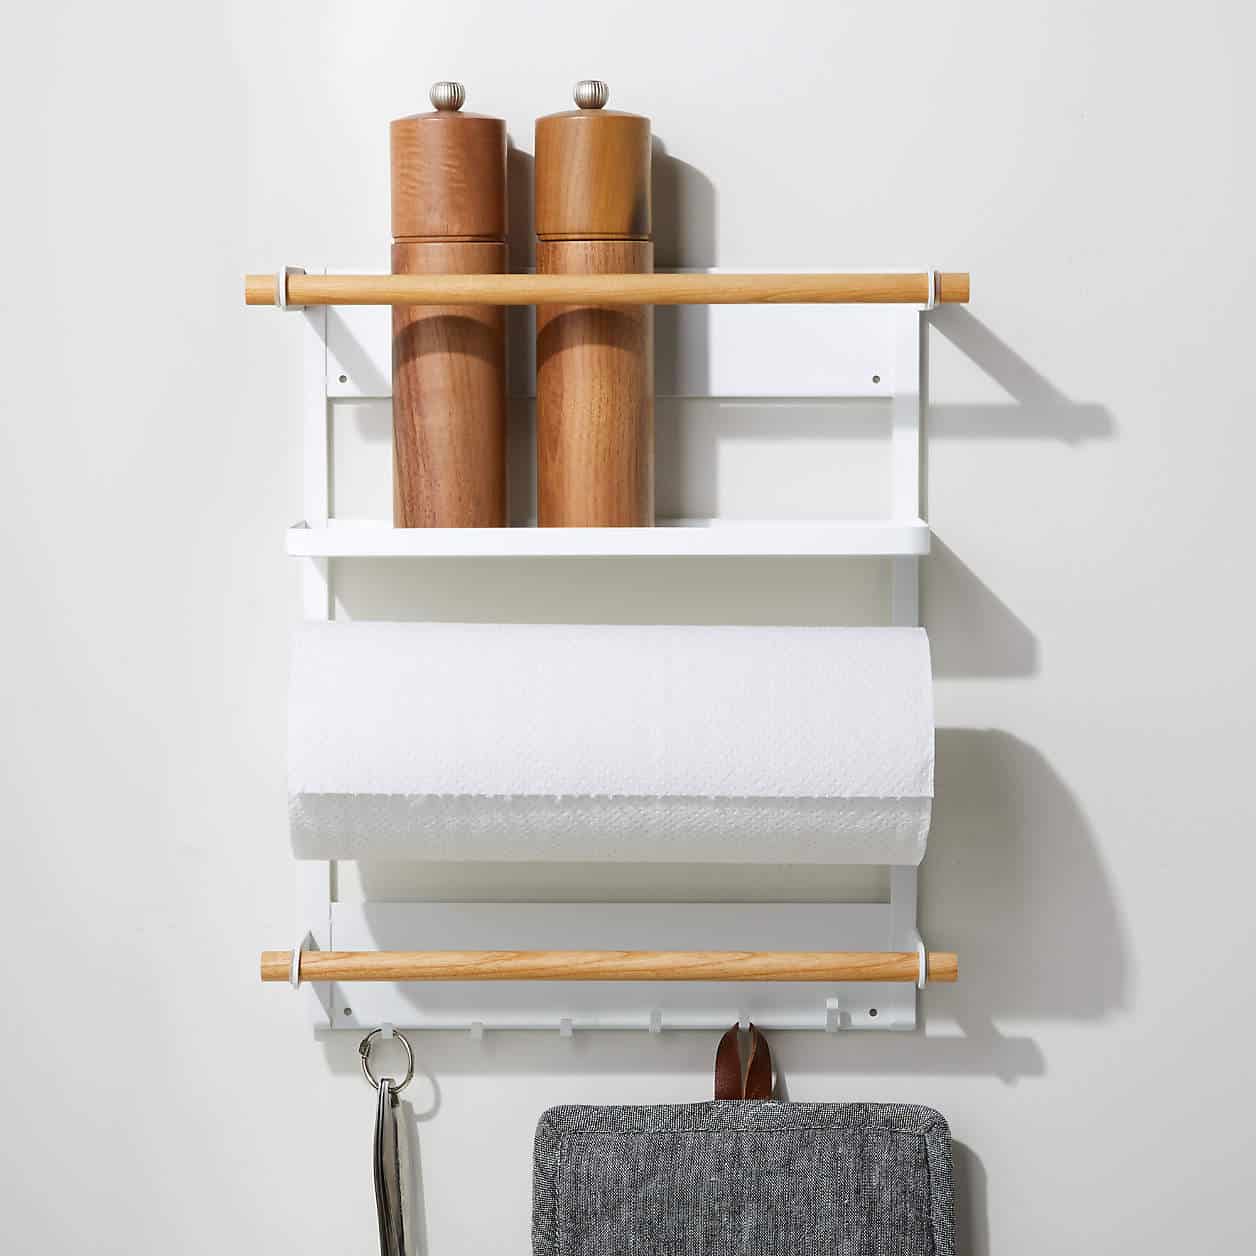 magnetic storage rack organizational ideas for organizing small spaces